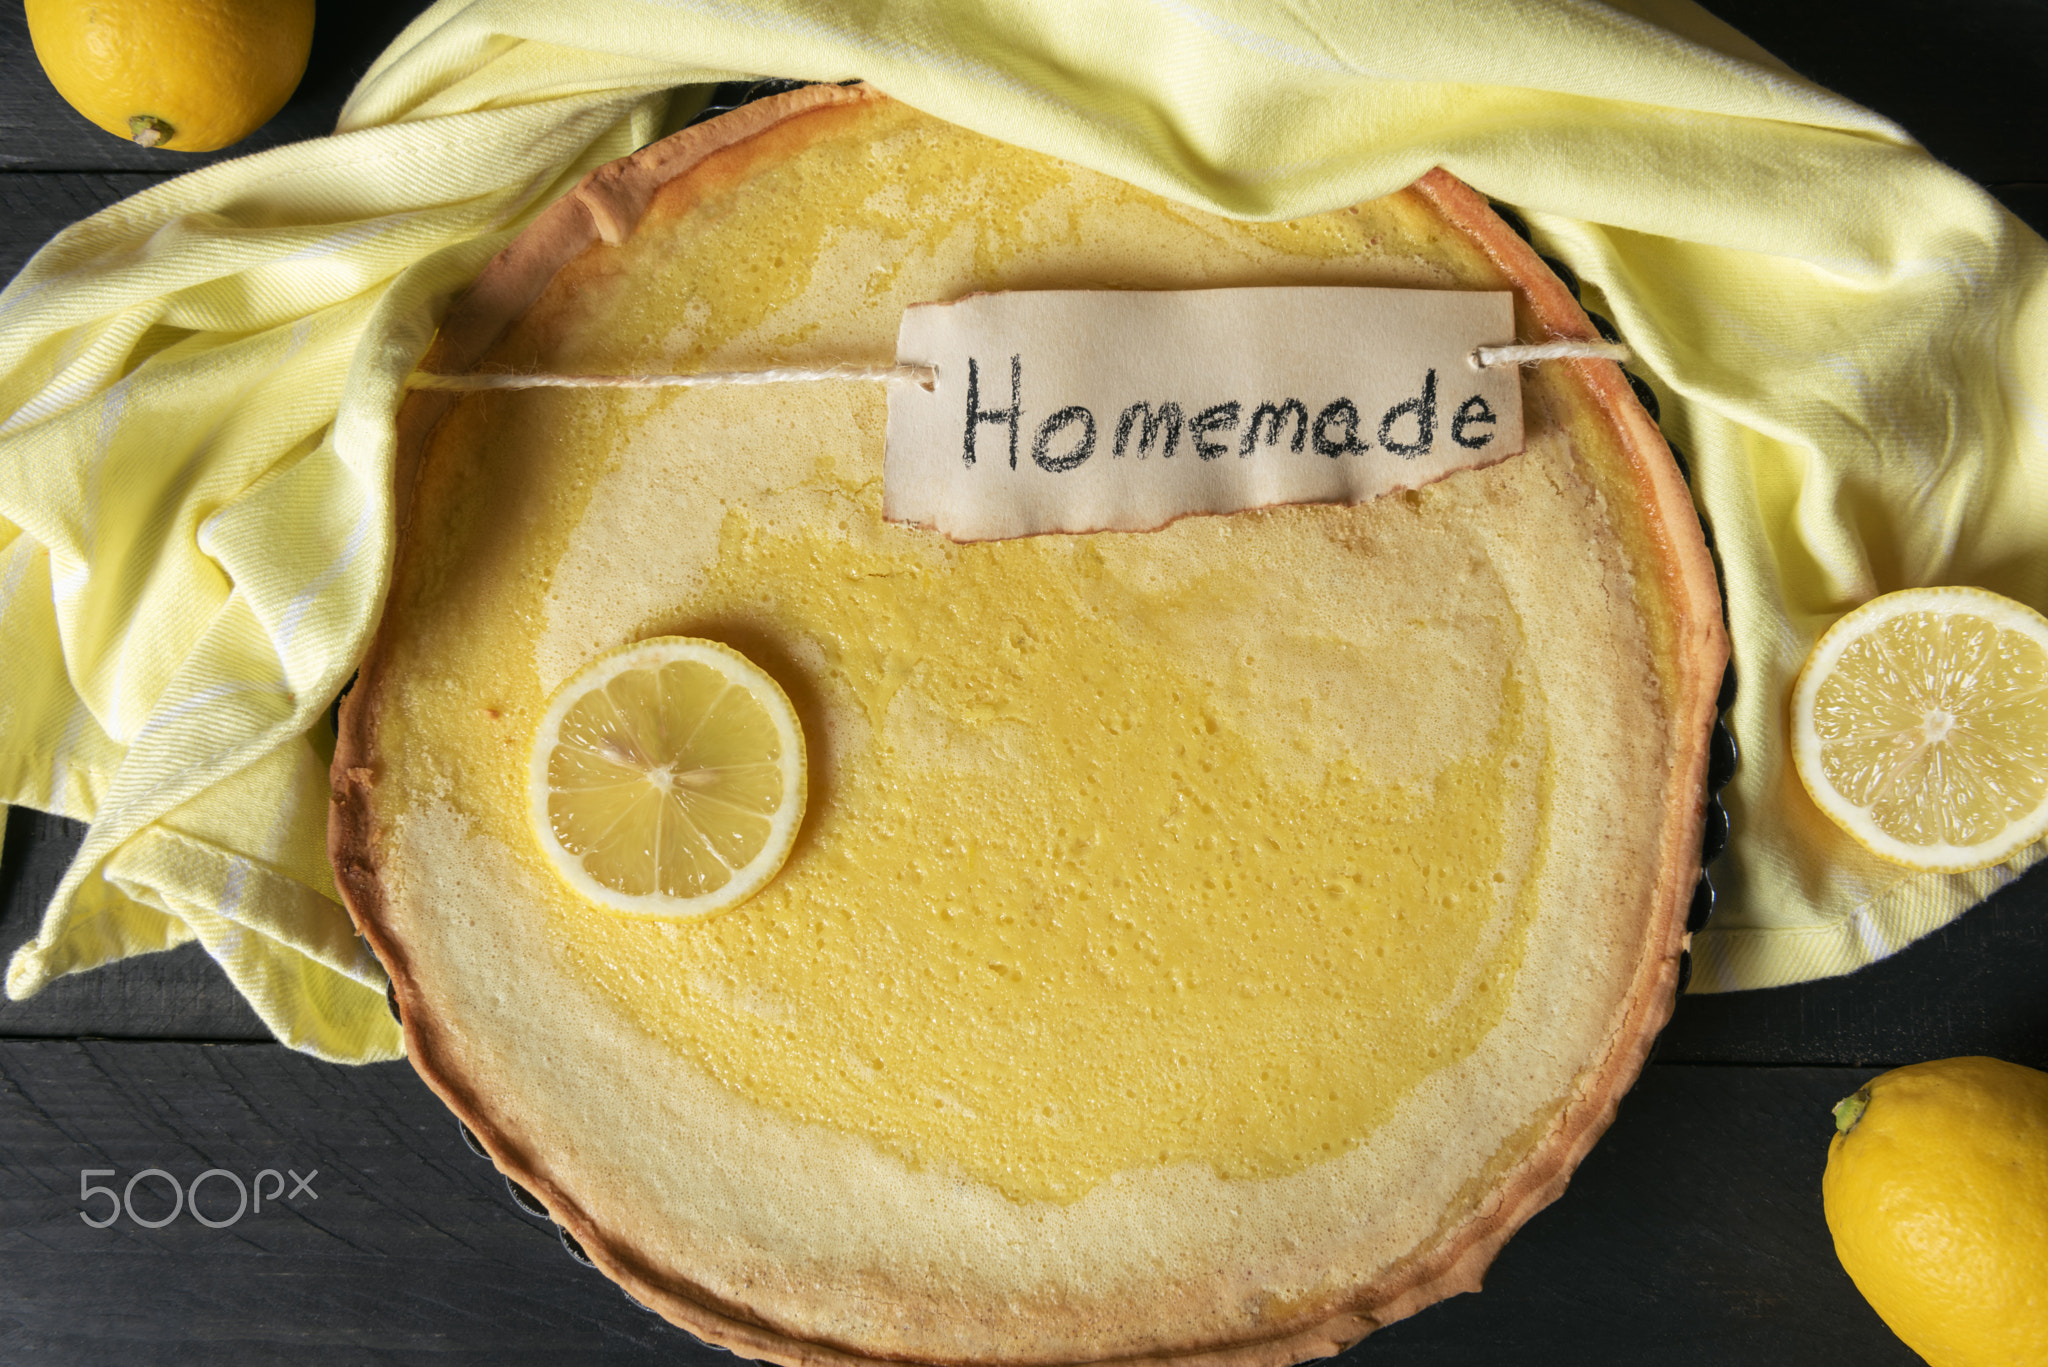 Homemade lemon pie on a yellow towel. Above view of dessert on a